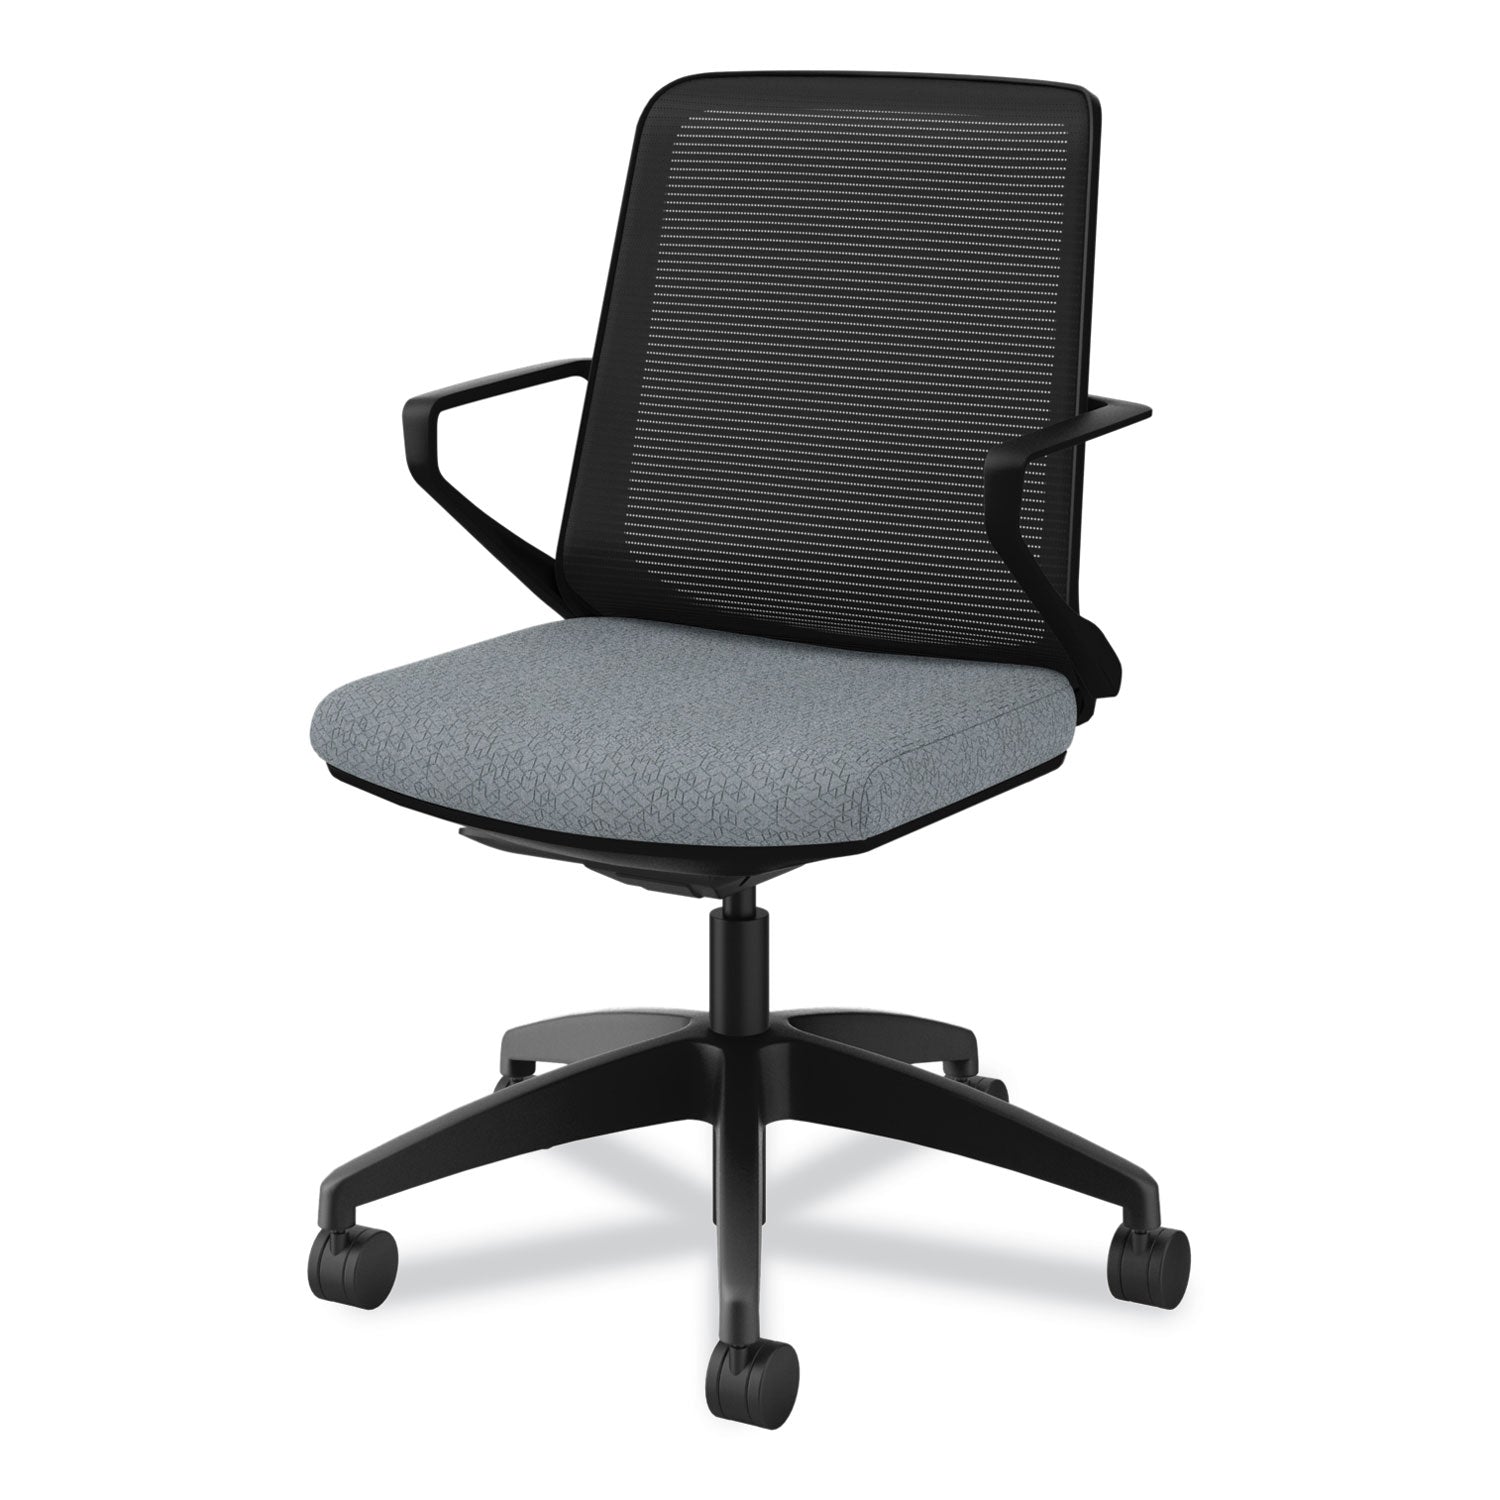 cliq-office-chair-supports-up-to-300-lb-17-to-22-seat-height-basalt-seat-black-back-base-ships-in-7-10-business-days_honclqimapx25t - 4